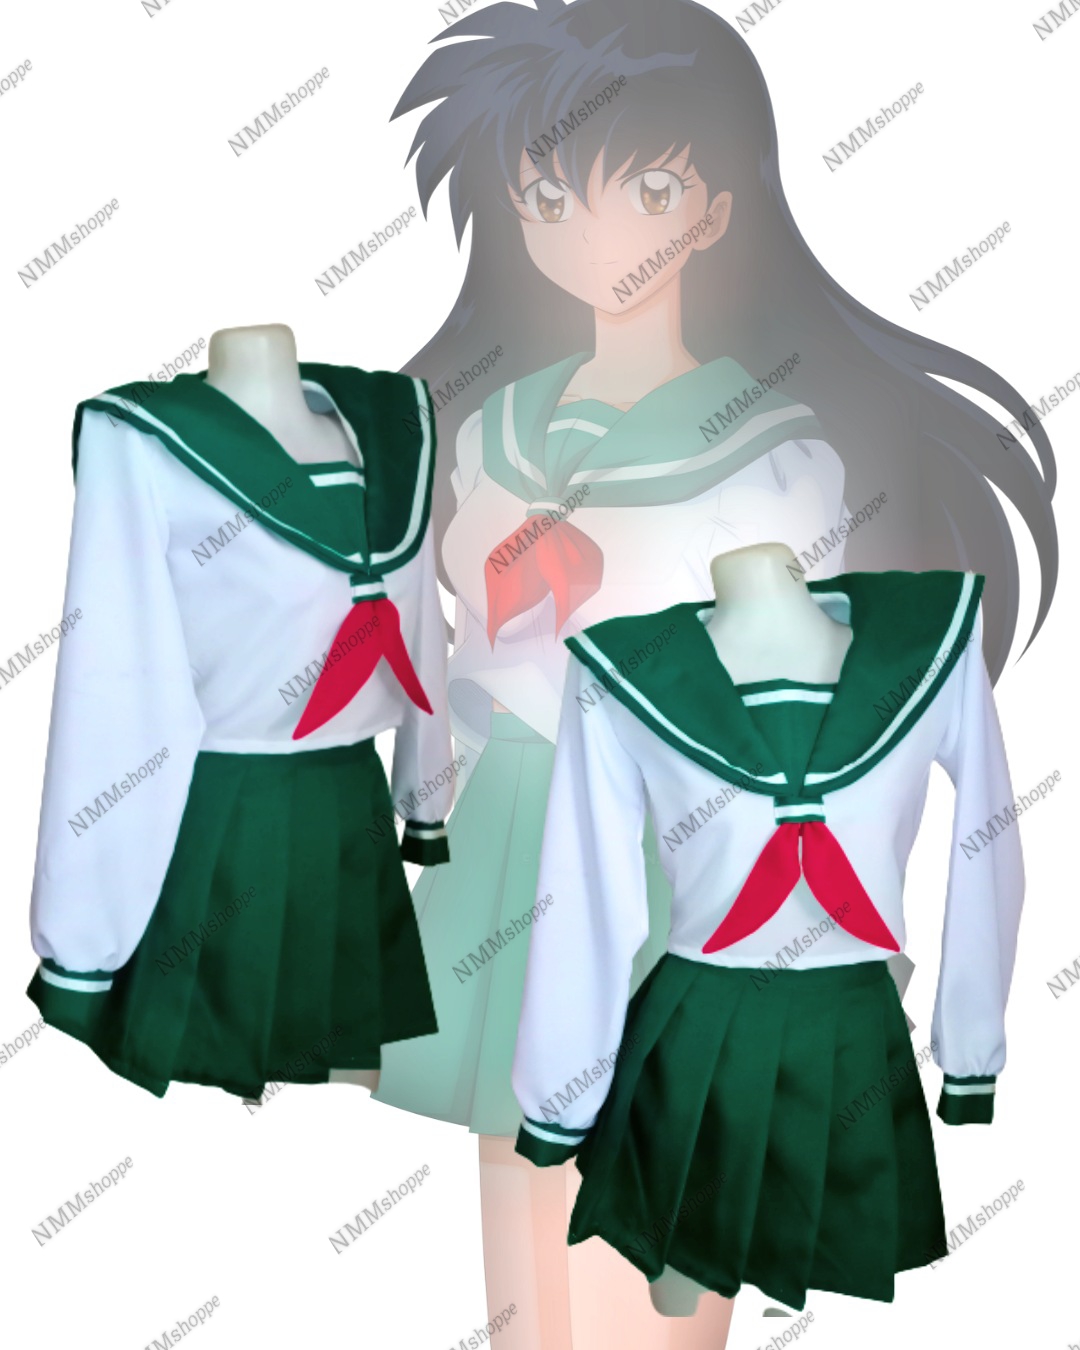 My gym uniform Kagome cosplay! I really loved this outfit on her growing up  and wanted to capture it. I know it's niche but I hope you guys like it!  Instagram: bumble.bees.cosplay 